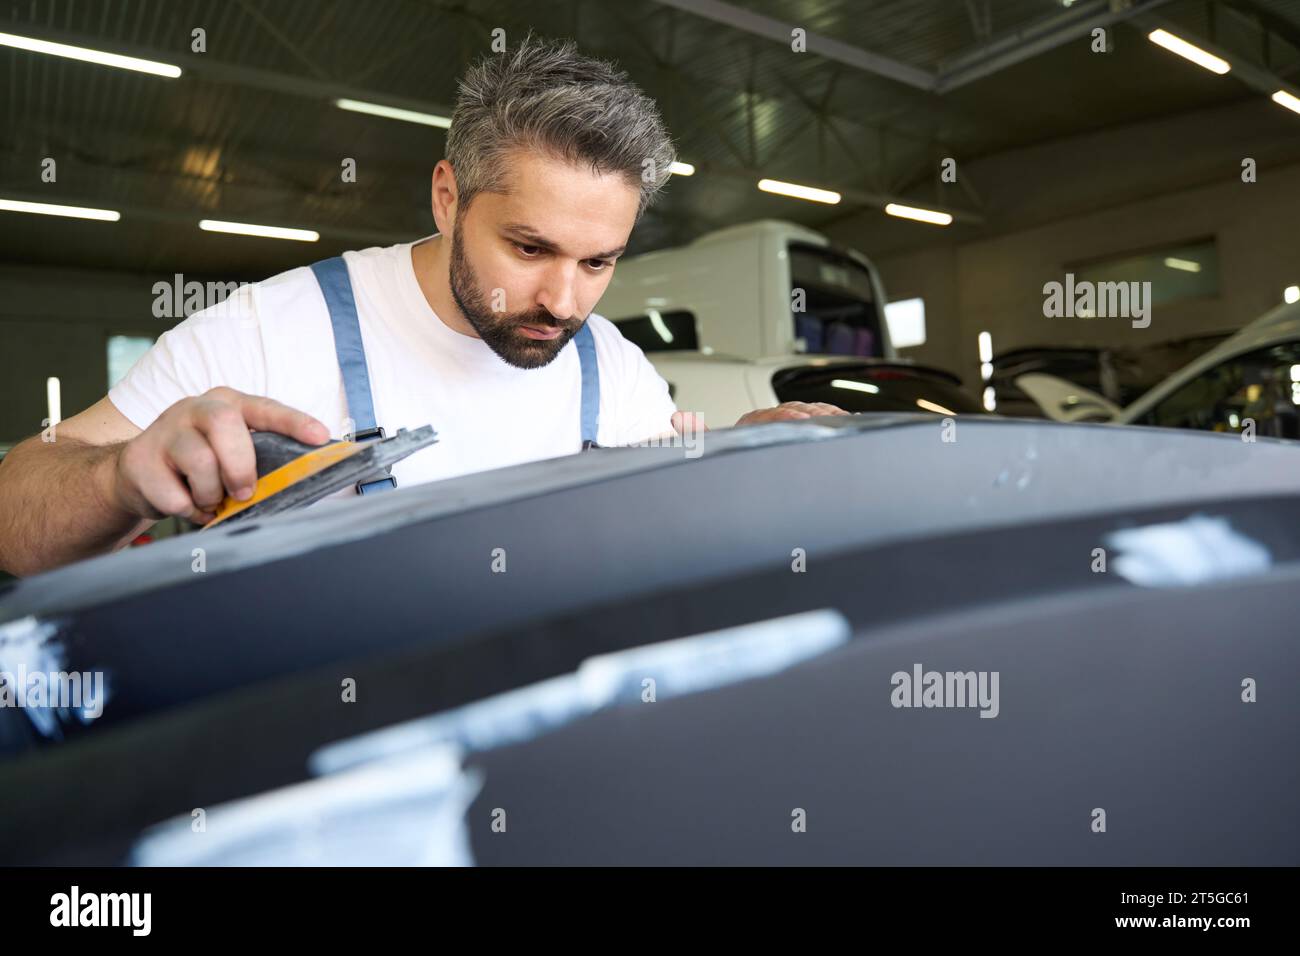 Professional automotive detailer polishing car body part with tool Stock Photo